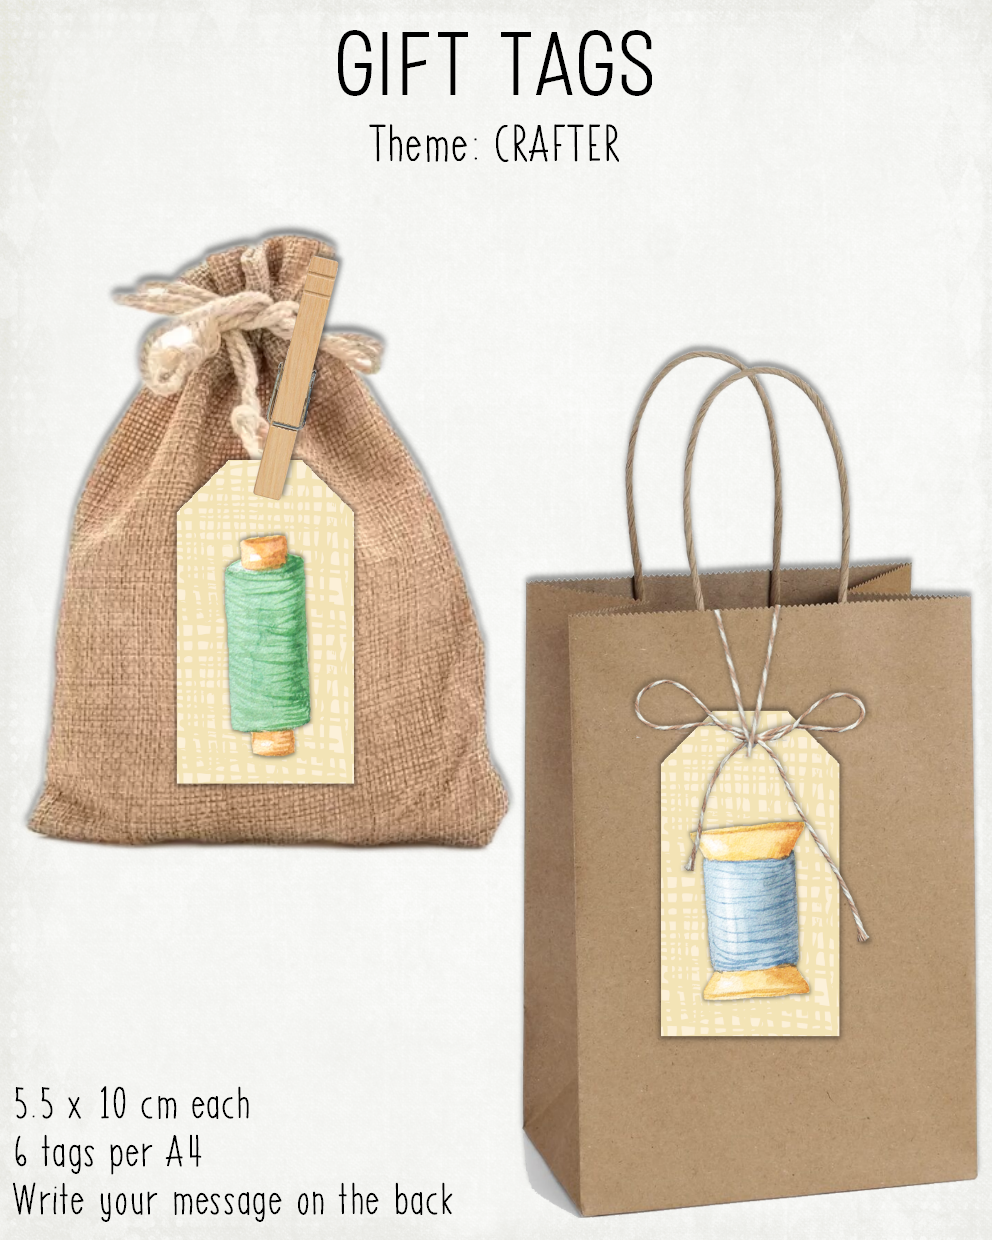 READY TO PRINT:  Gift Tags - Crafter